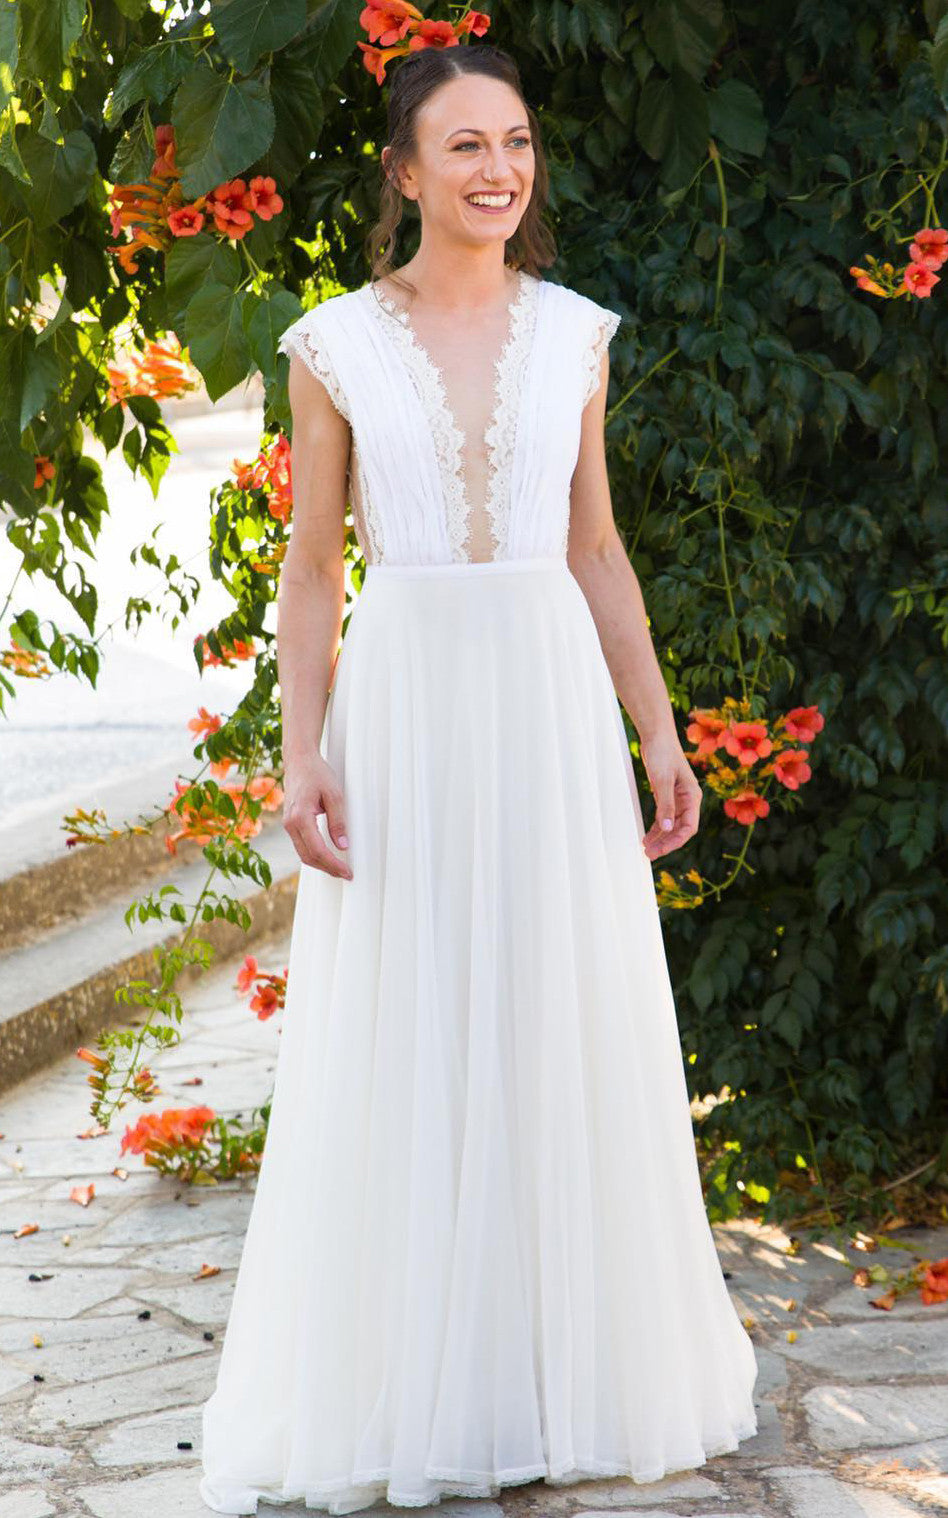 Greek A-Line Plunging Neckline Chiffon Lace Wedding Dress With Open Back And Pleats